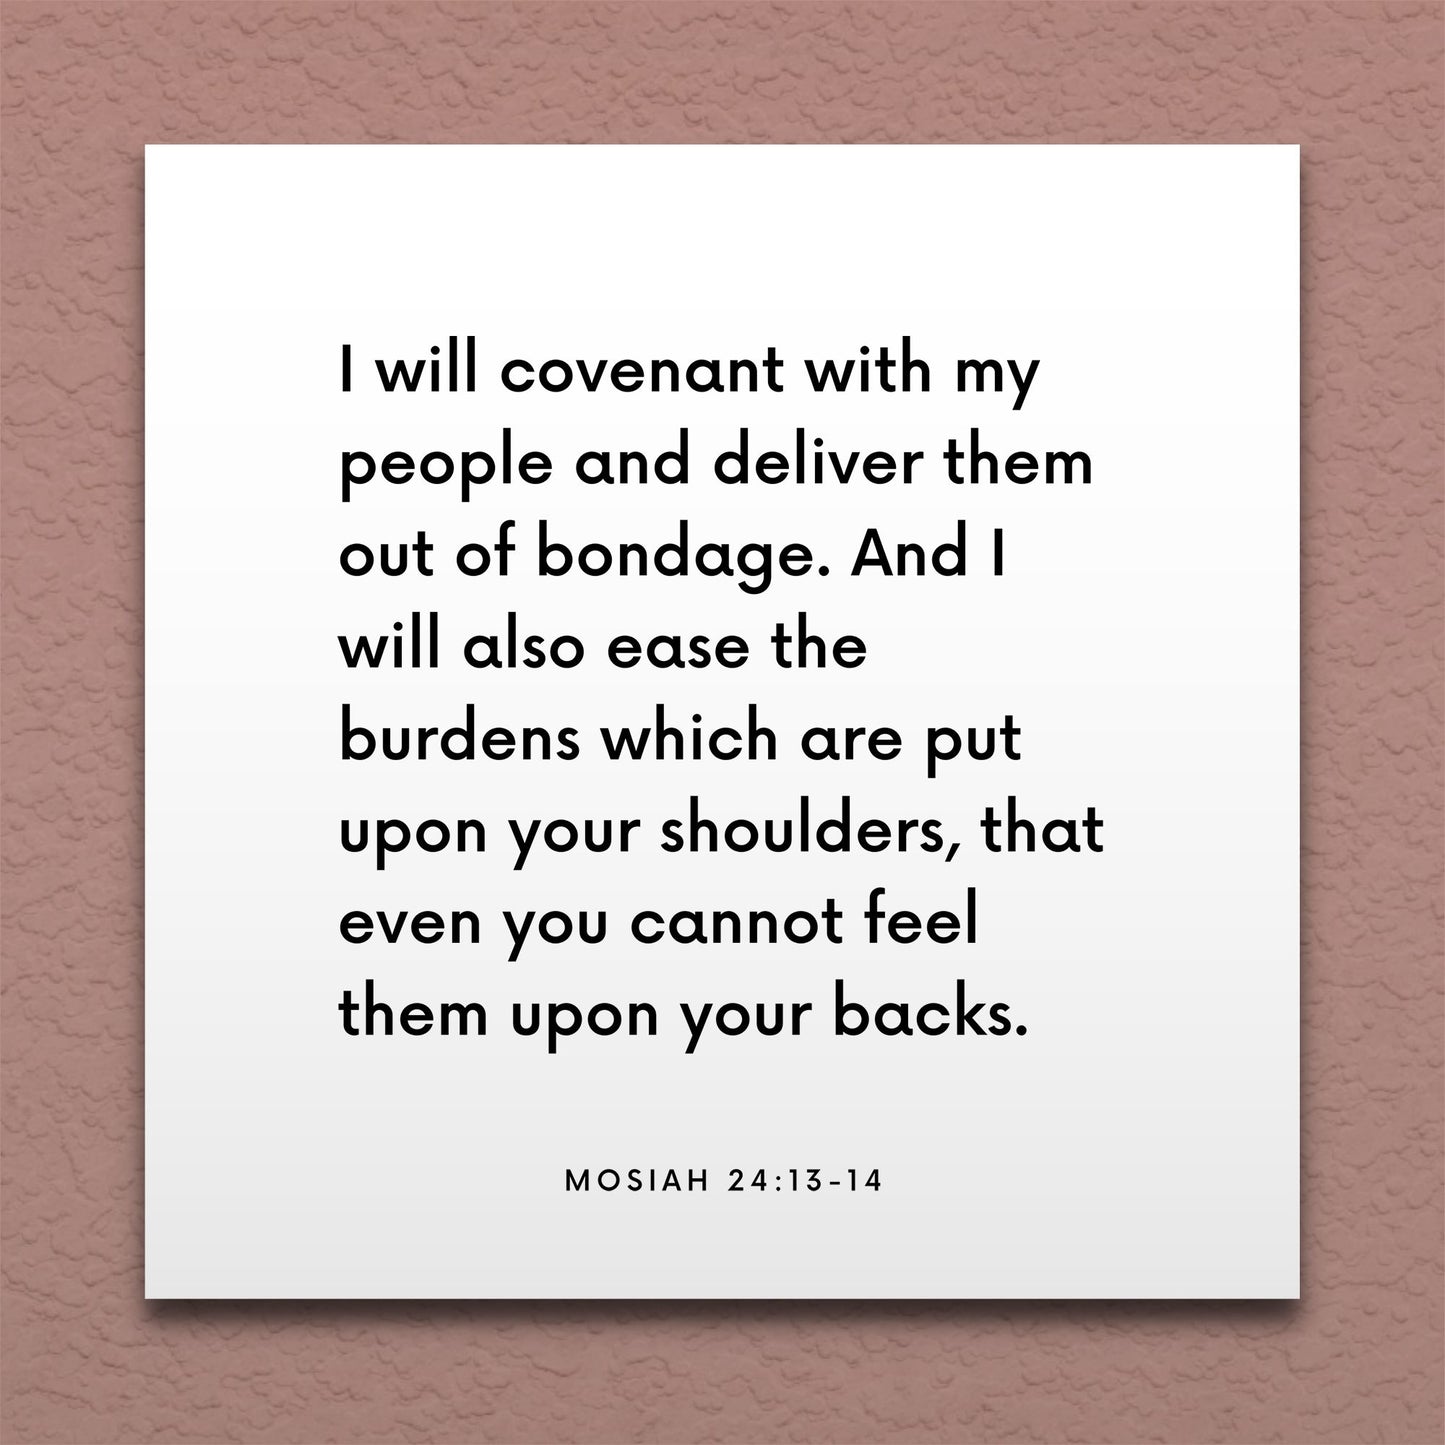 Wall-mounted scripture tile for Mosiah 24:13-14 - "I will covenant with my people and deliver them"